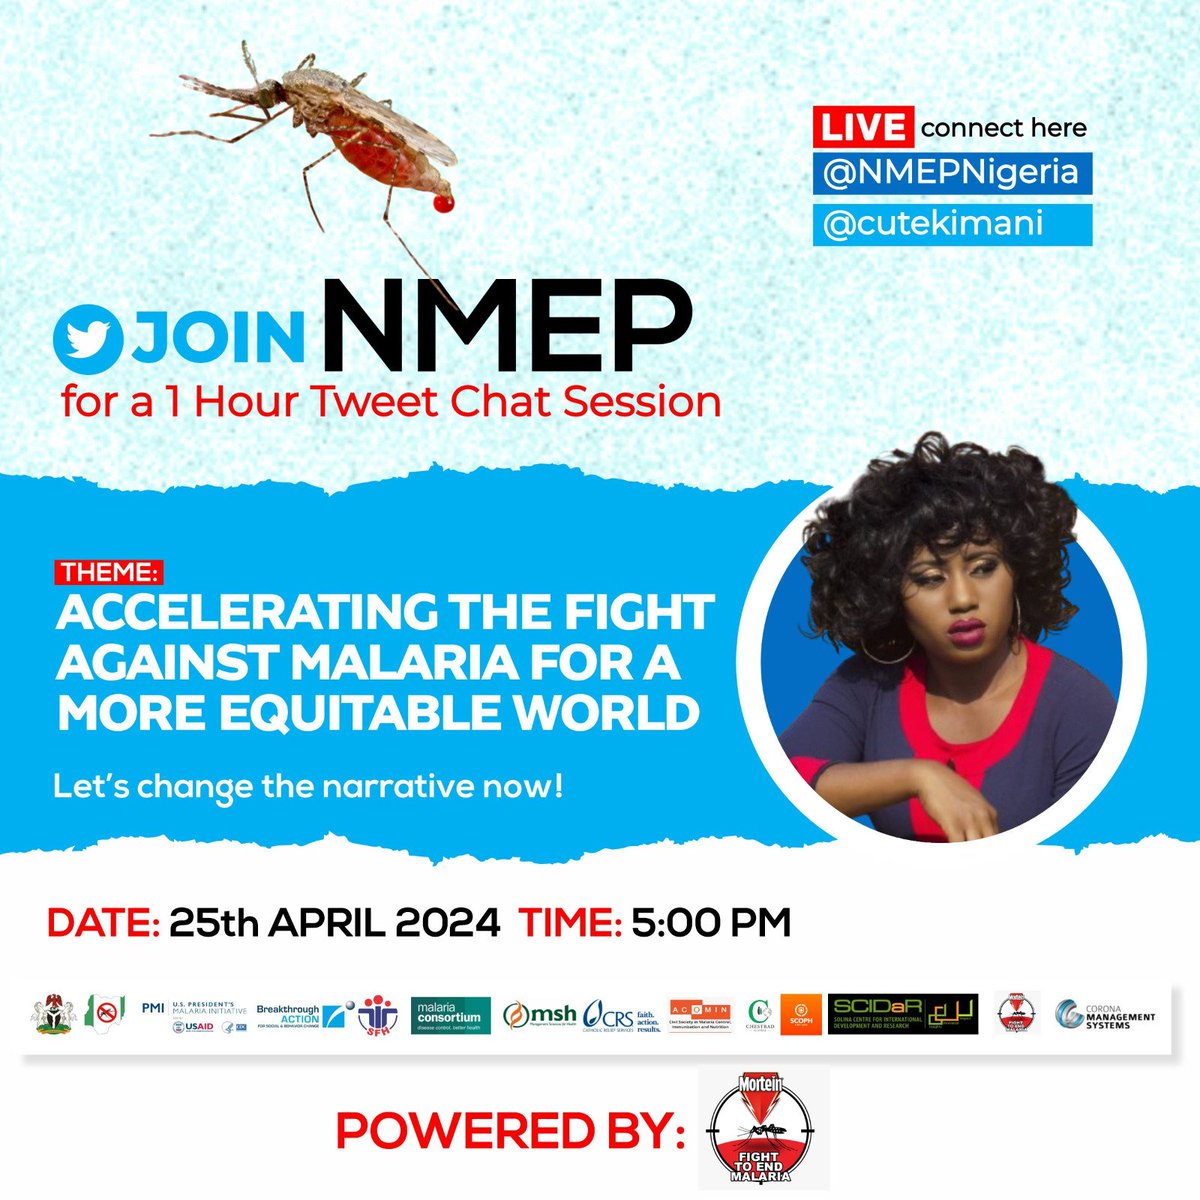 Guys, the tweetchat session with @Cutekimani and @NMEPNigeria is going on live.  Don't miss this discussion, there is so much to learn. 

#2024WMD 
#ZeroMalariaStartsWithMe
#KimaniOffAir